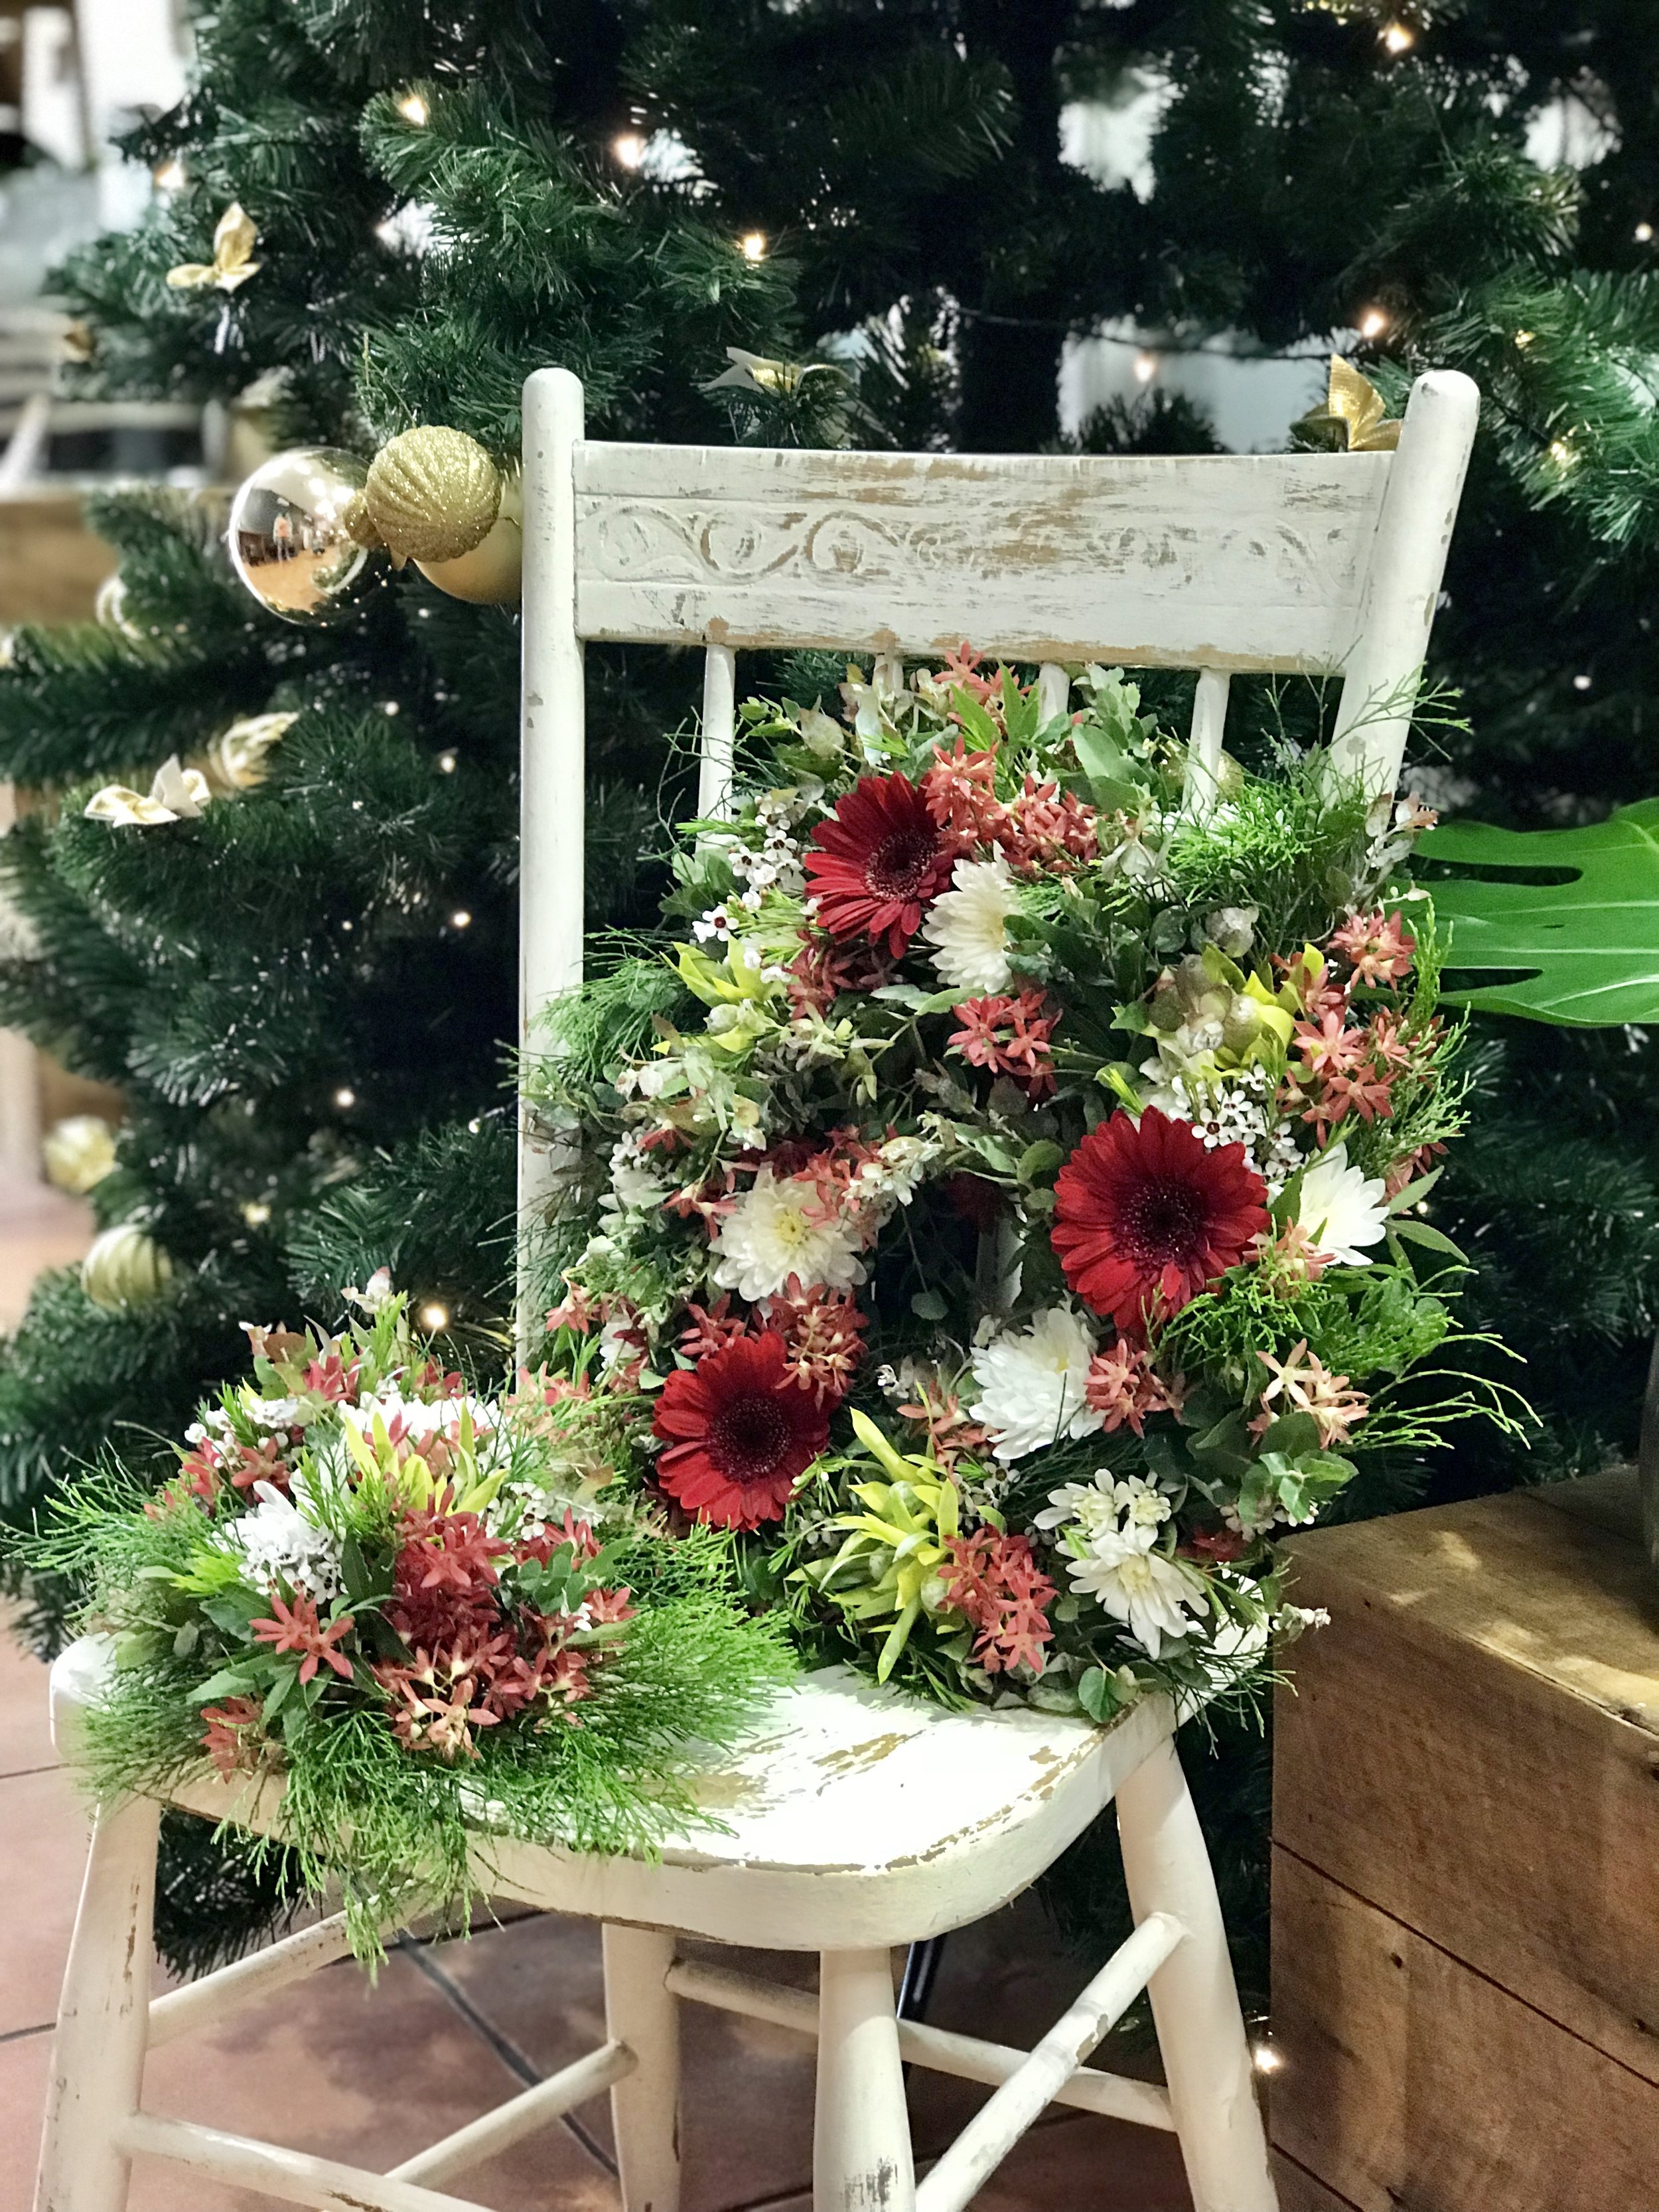  My creations from the Northside Flower Market Christmas wreath and table centre piece workshop. 